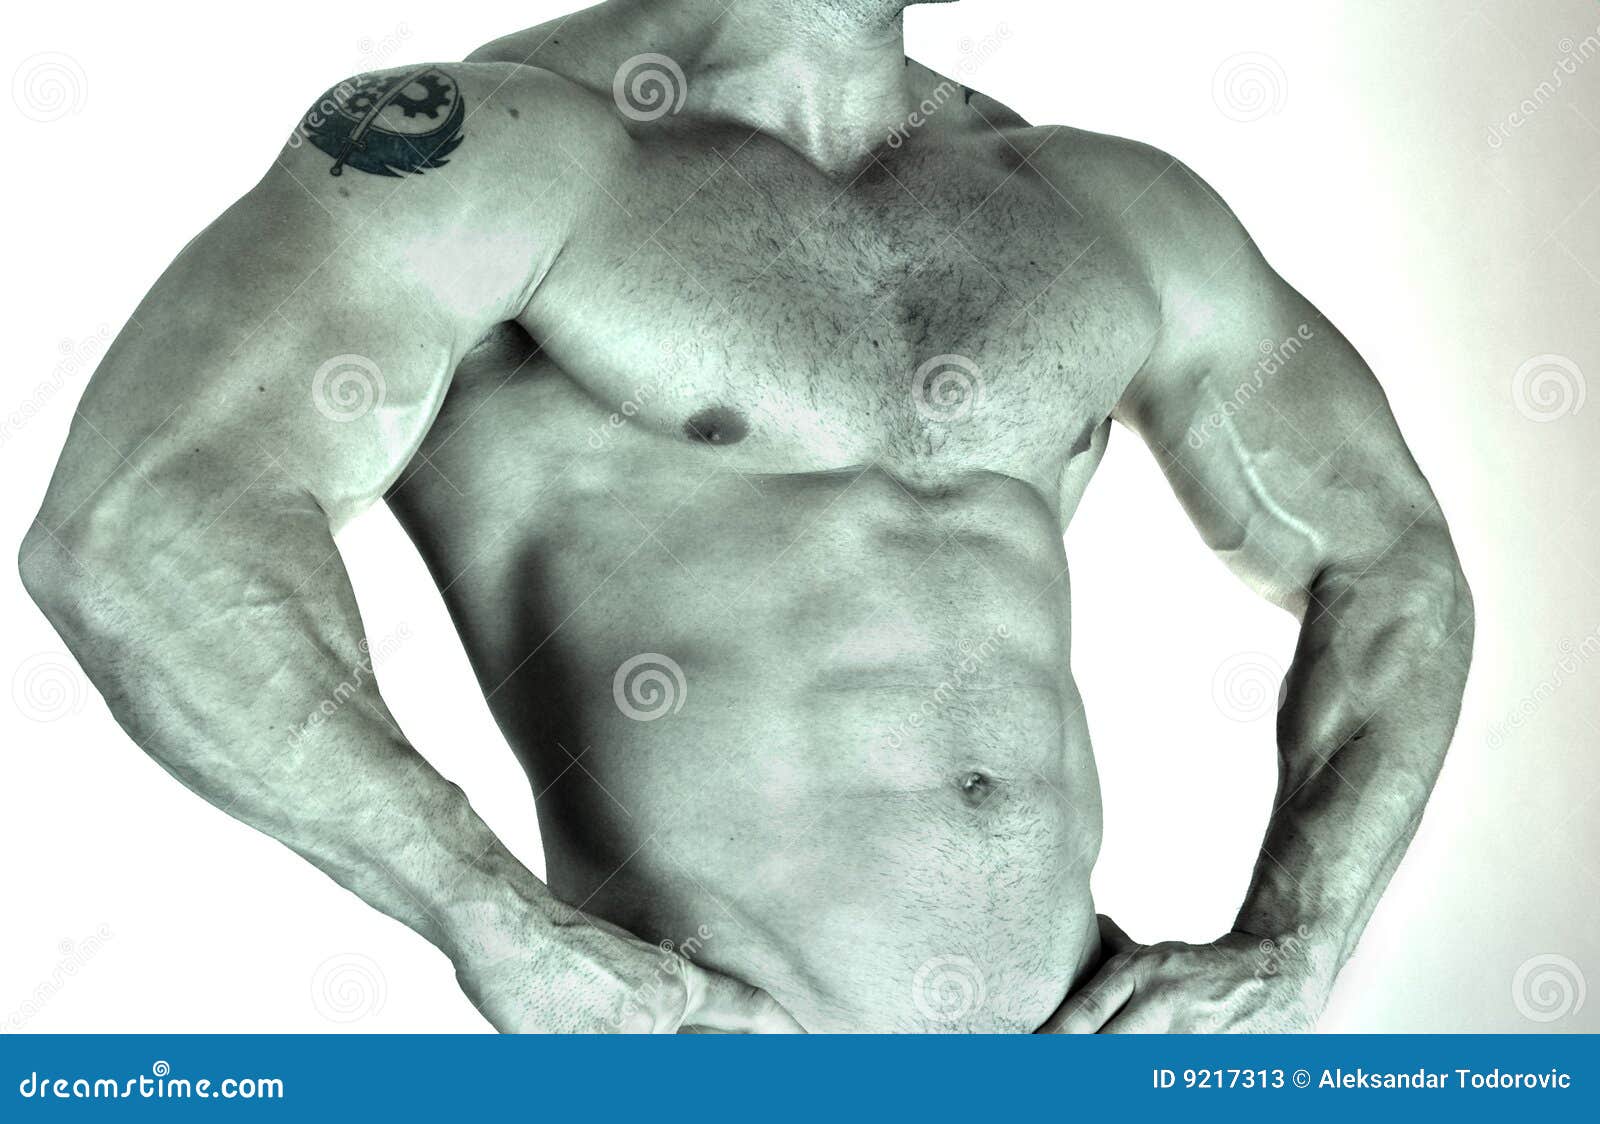 Males Body (part) Stock Image - Image: 14070511